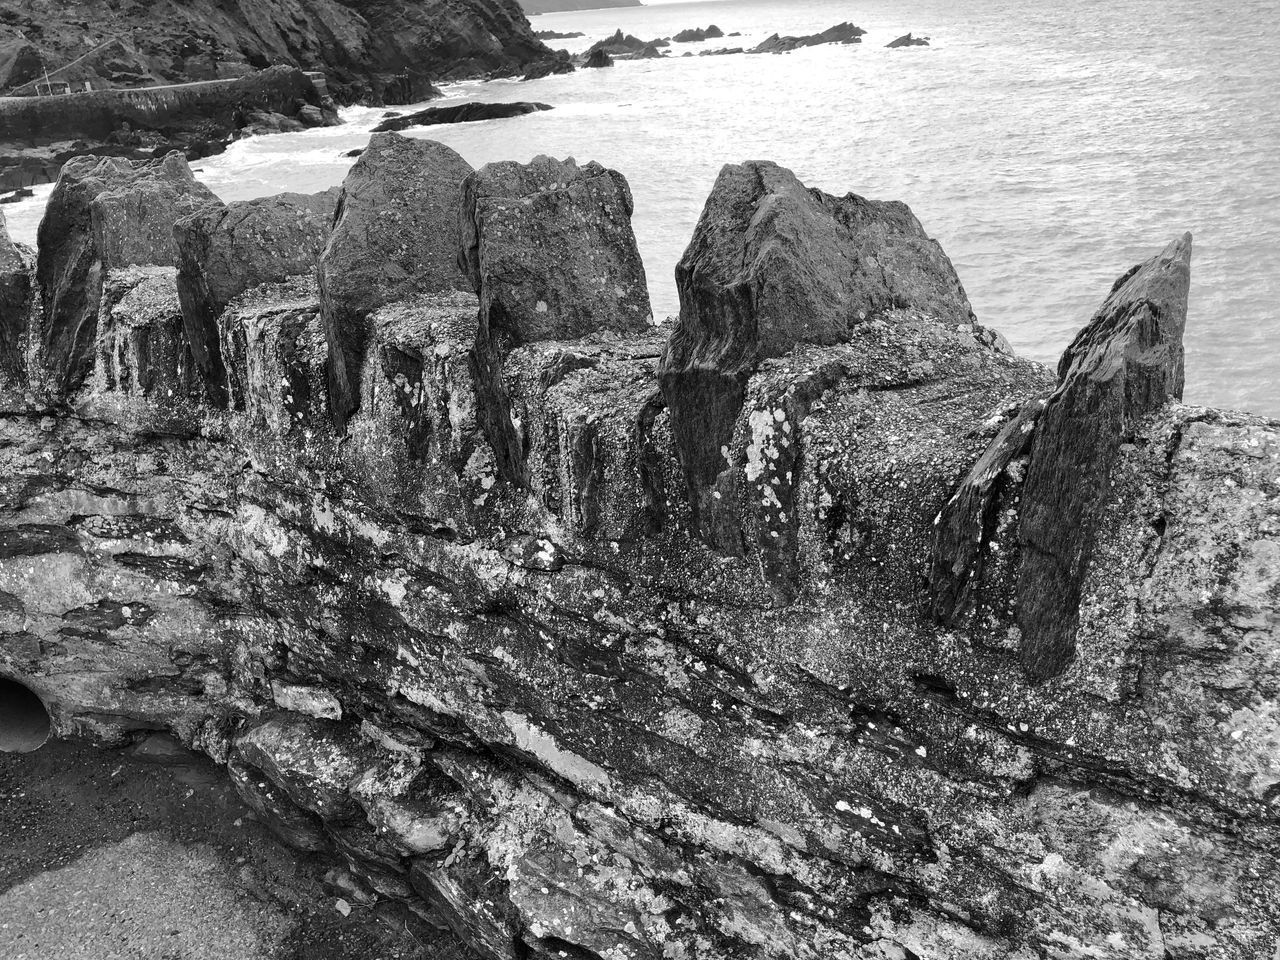 ROCK FORMATIONS ON SHORE